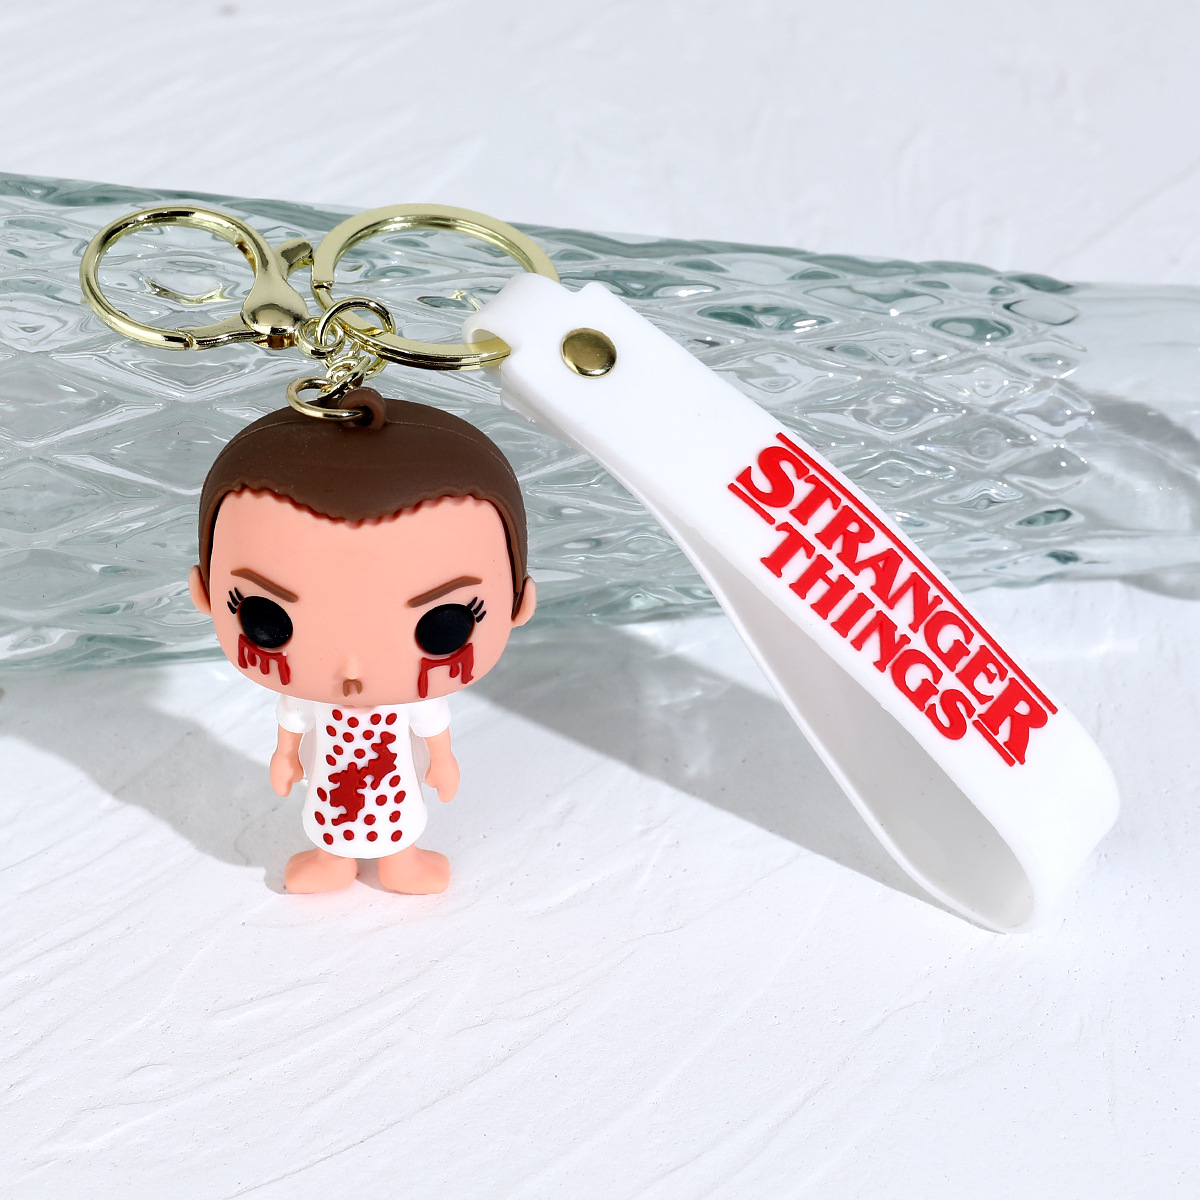 Cartoon Anime Stranger Things Silicone Doll Keychain Pendant Student Couple Bags Car Key Chain Hanging Ornament